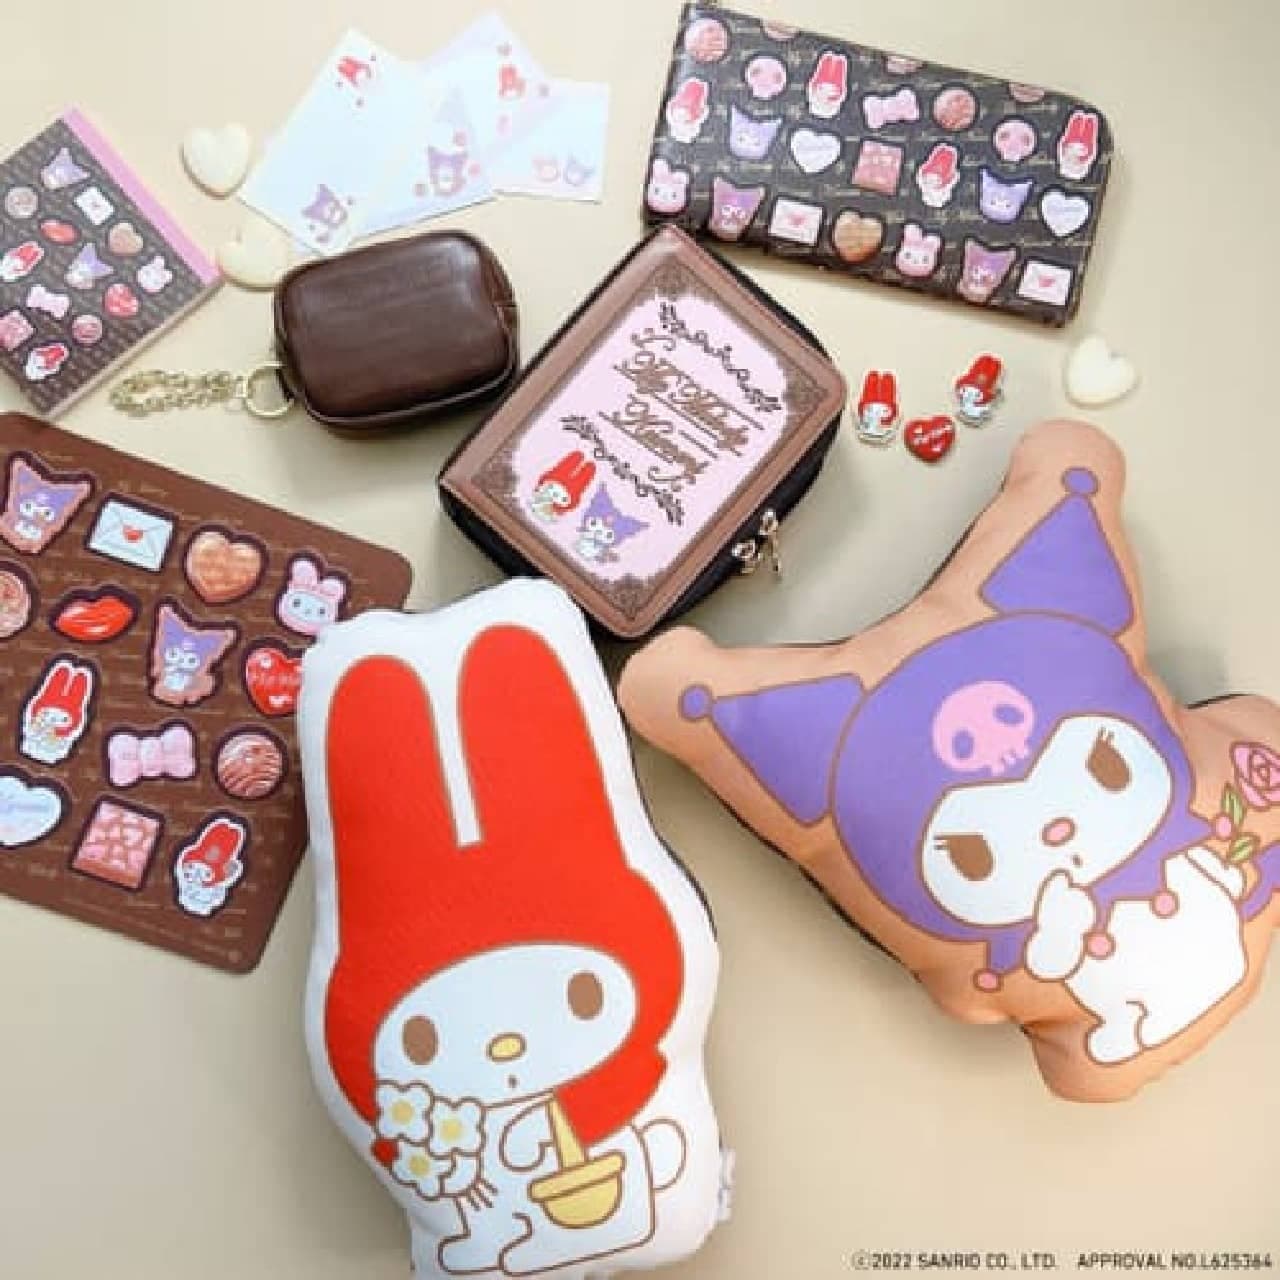 ITS’DEMO × My Melody Valentine's Day product --Chocolate pattern & My Melody mom pattern! Stationery, pouch, etc.